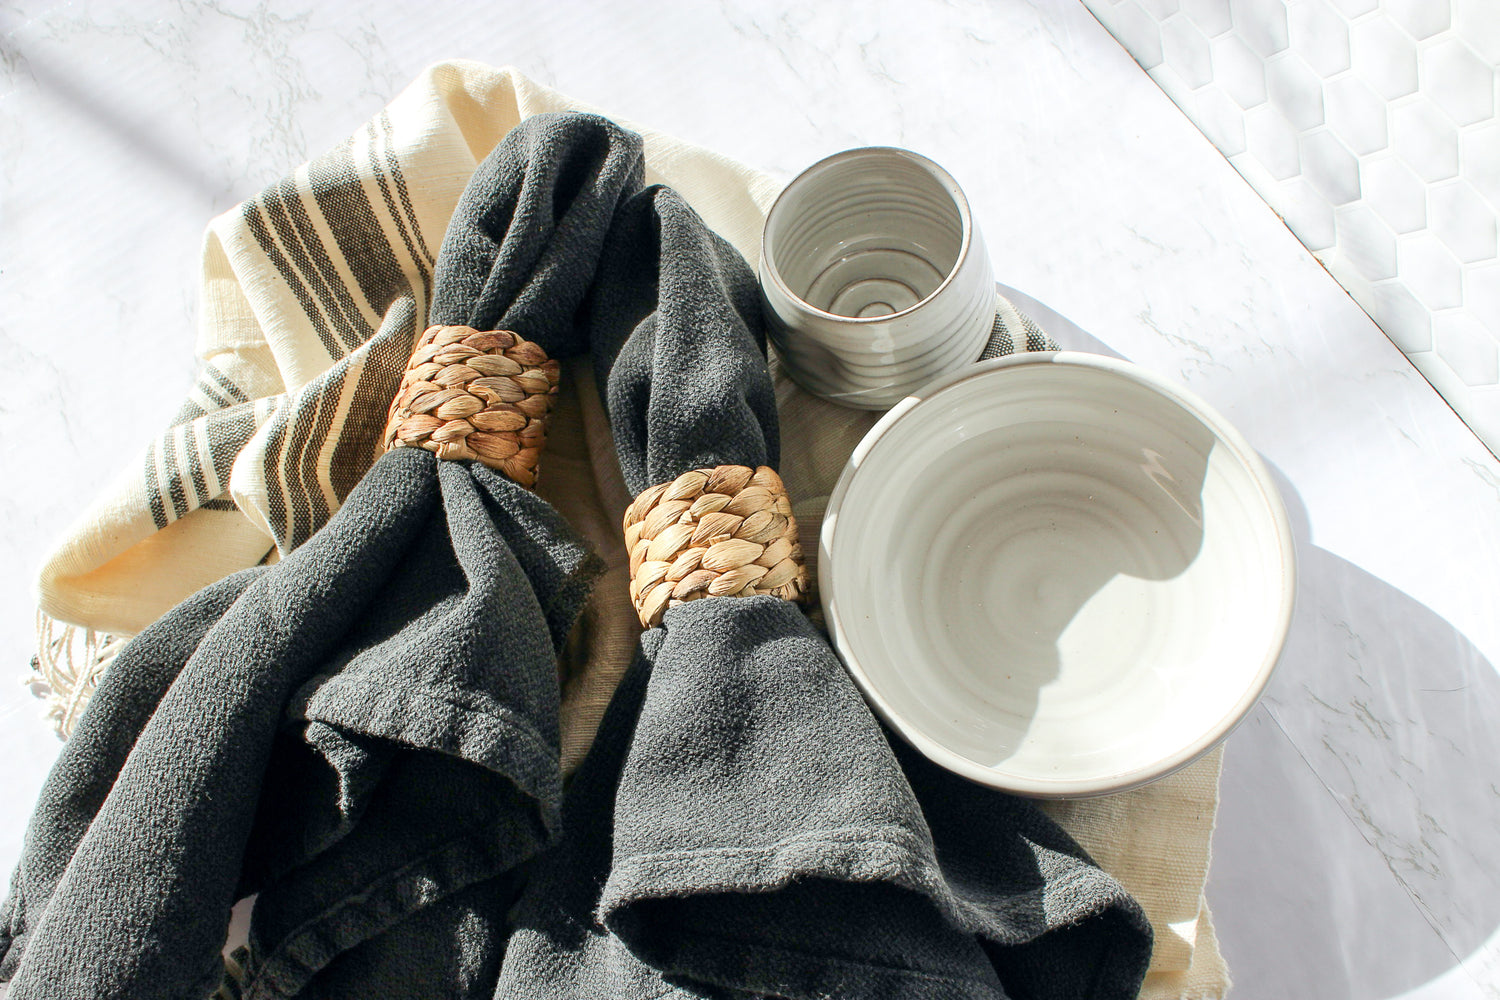 In beautiful morning light, our hatch cotton tea towel lays on a marble countertop. Two cloth napkins with our seagrass napkin rings sit on top of the towel. Our favorite bowl and tipsy tumbler complete the display